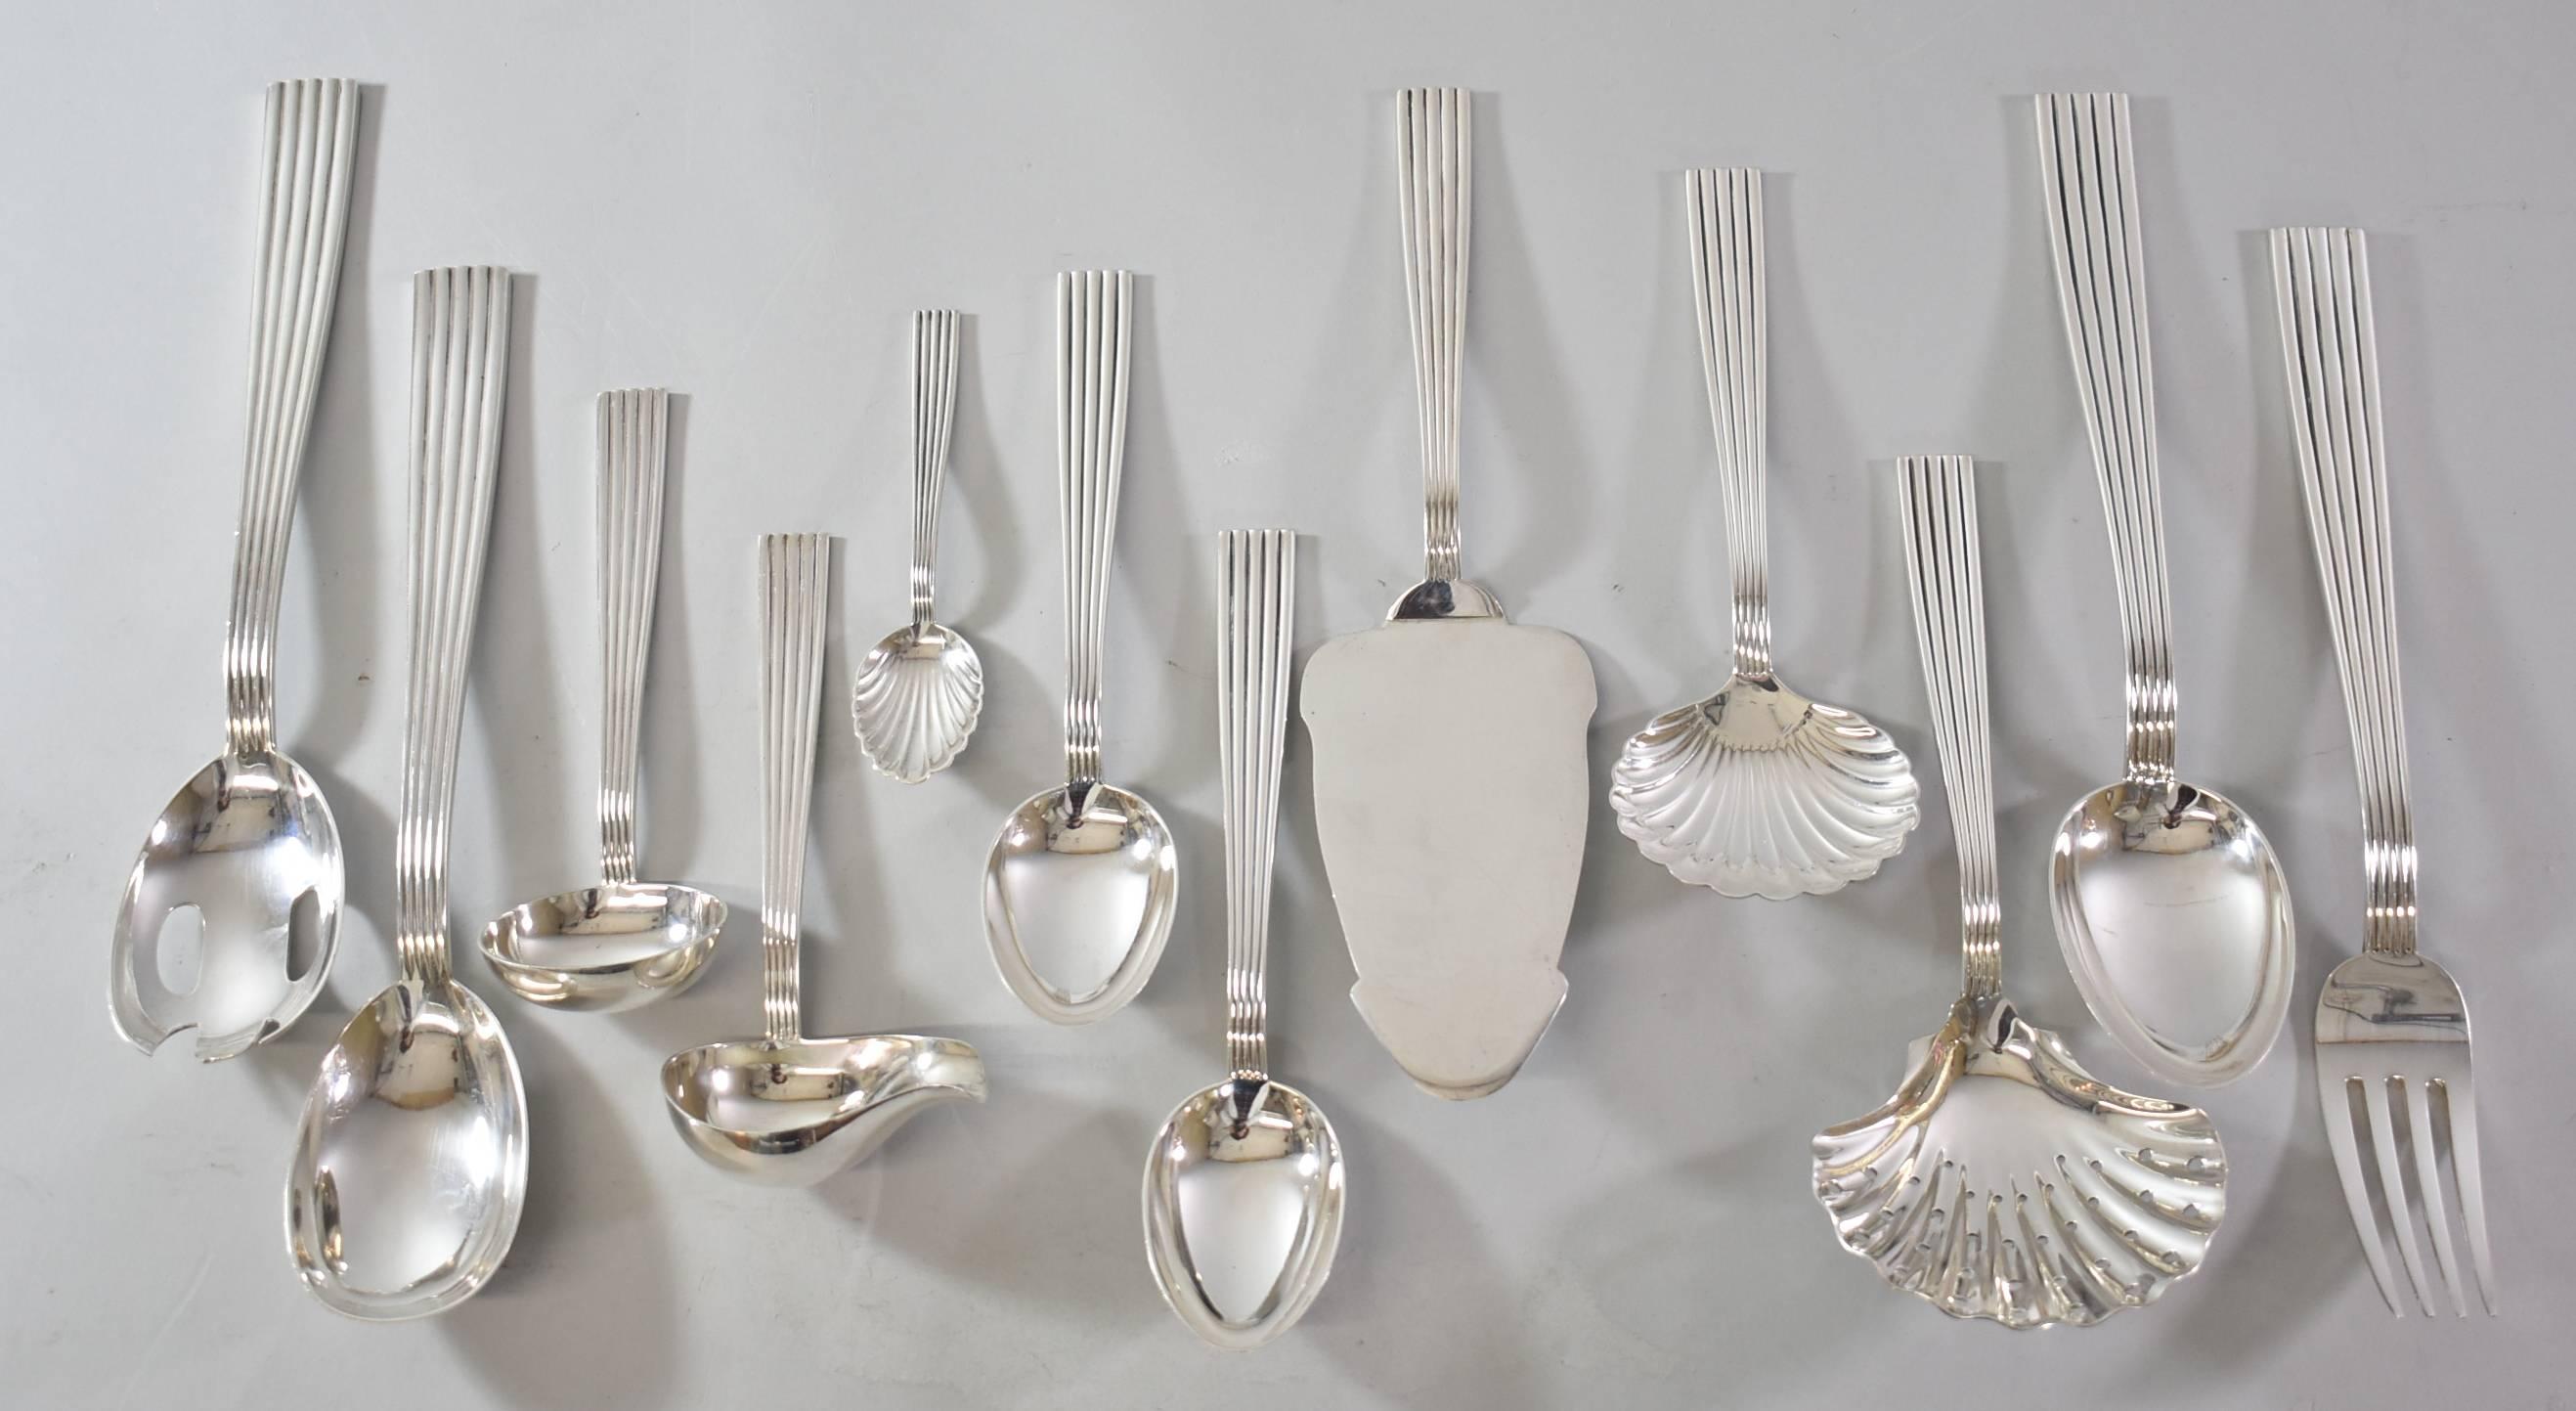 Molded Tiber by Buccellati Italy Sterling Silver Flatware 70 Pieces